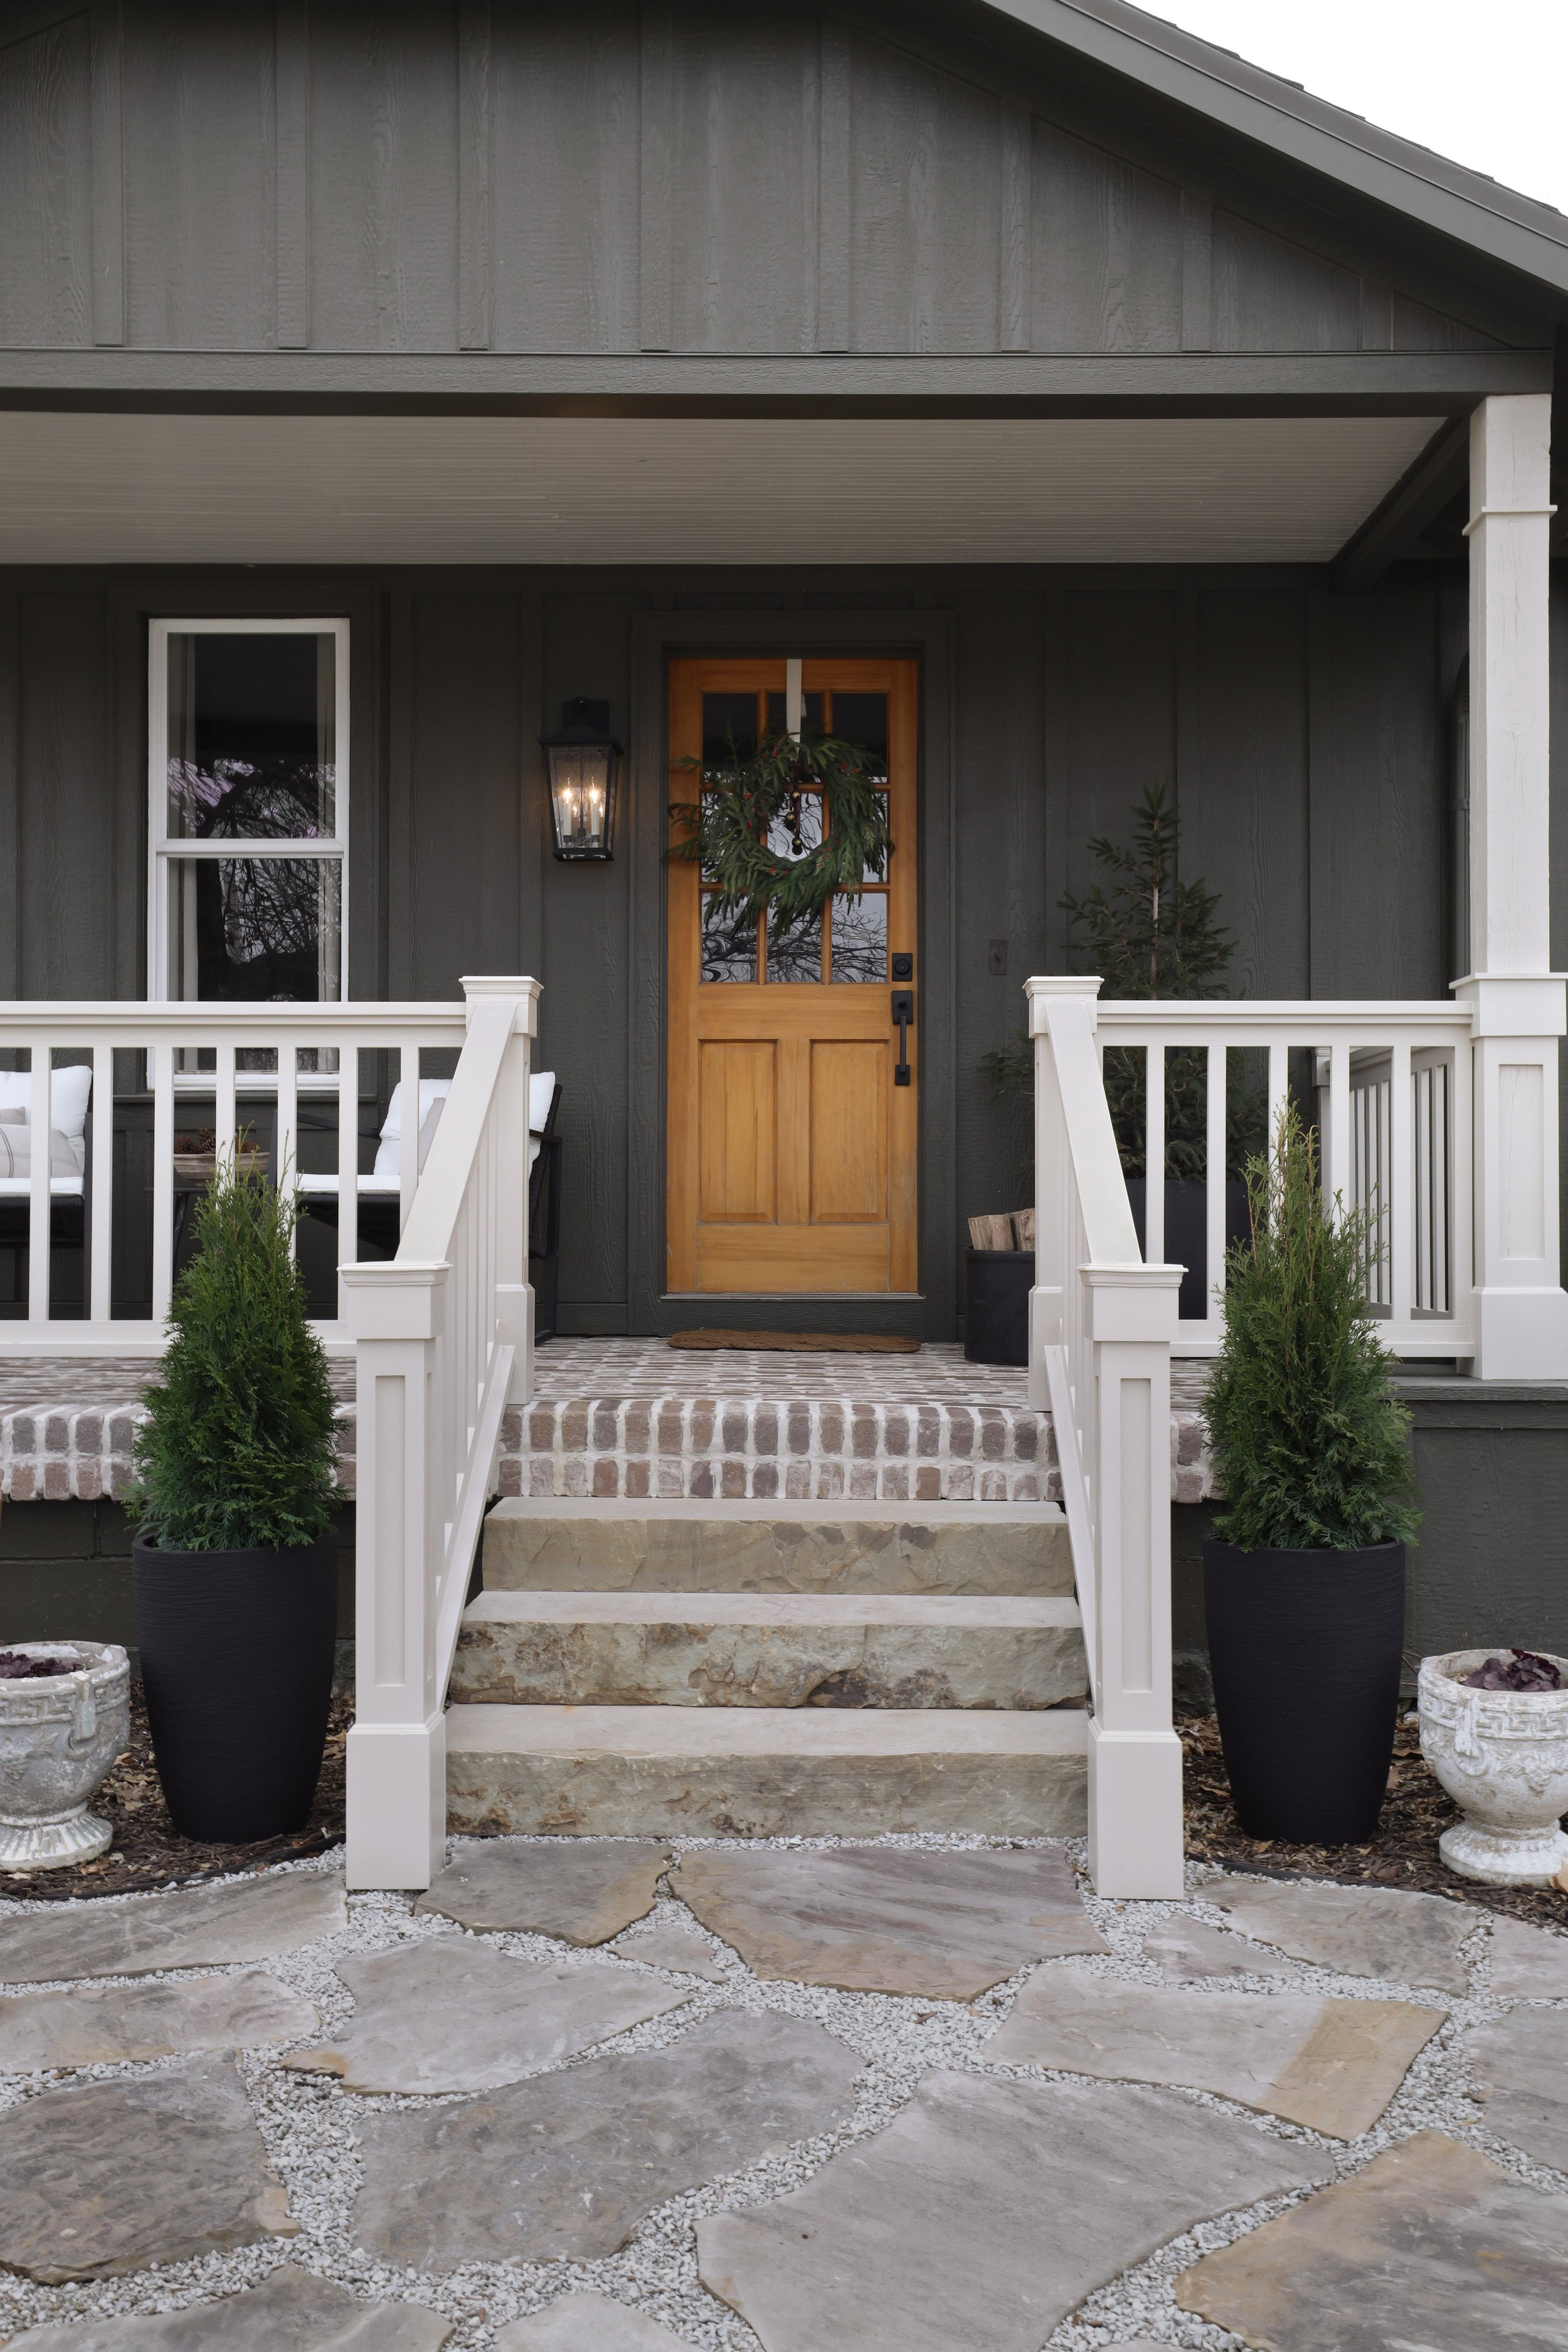 Porch before and after by Nadine Stay | Green exterior paint color. DIY porch brick floor. DIY flagstone path. DIY custom porch railing. Beige paint color for exterior. A craftsman porch railing. Box trim on porch railing posts.